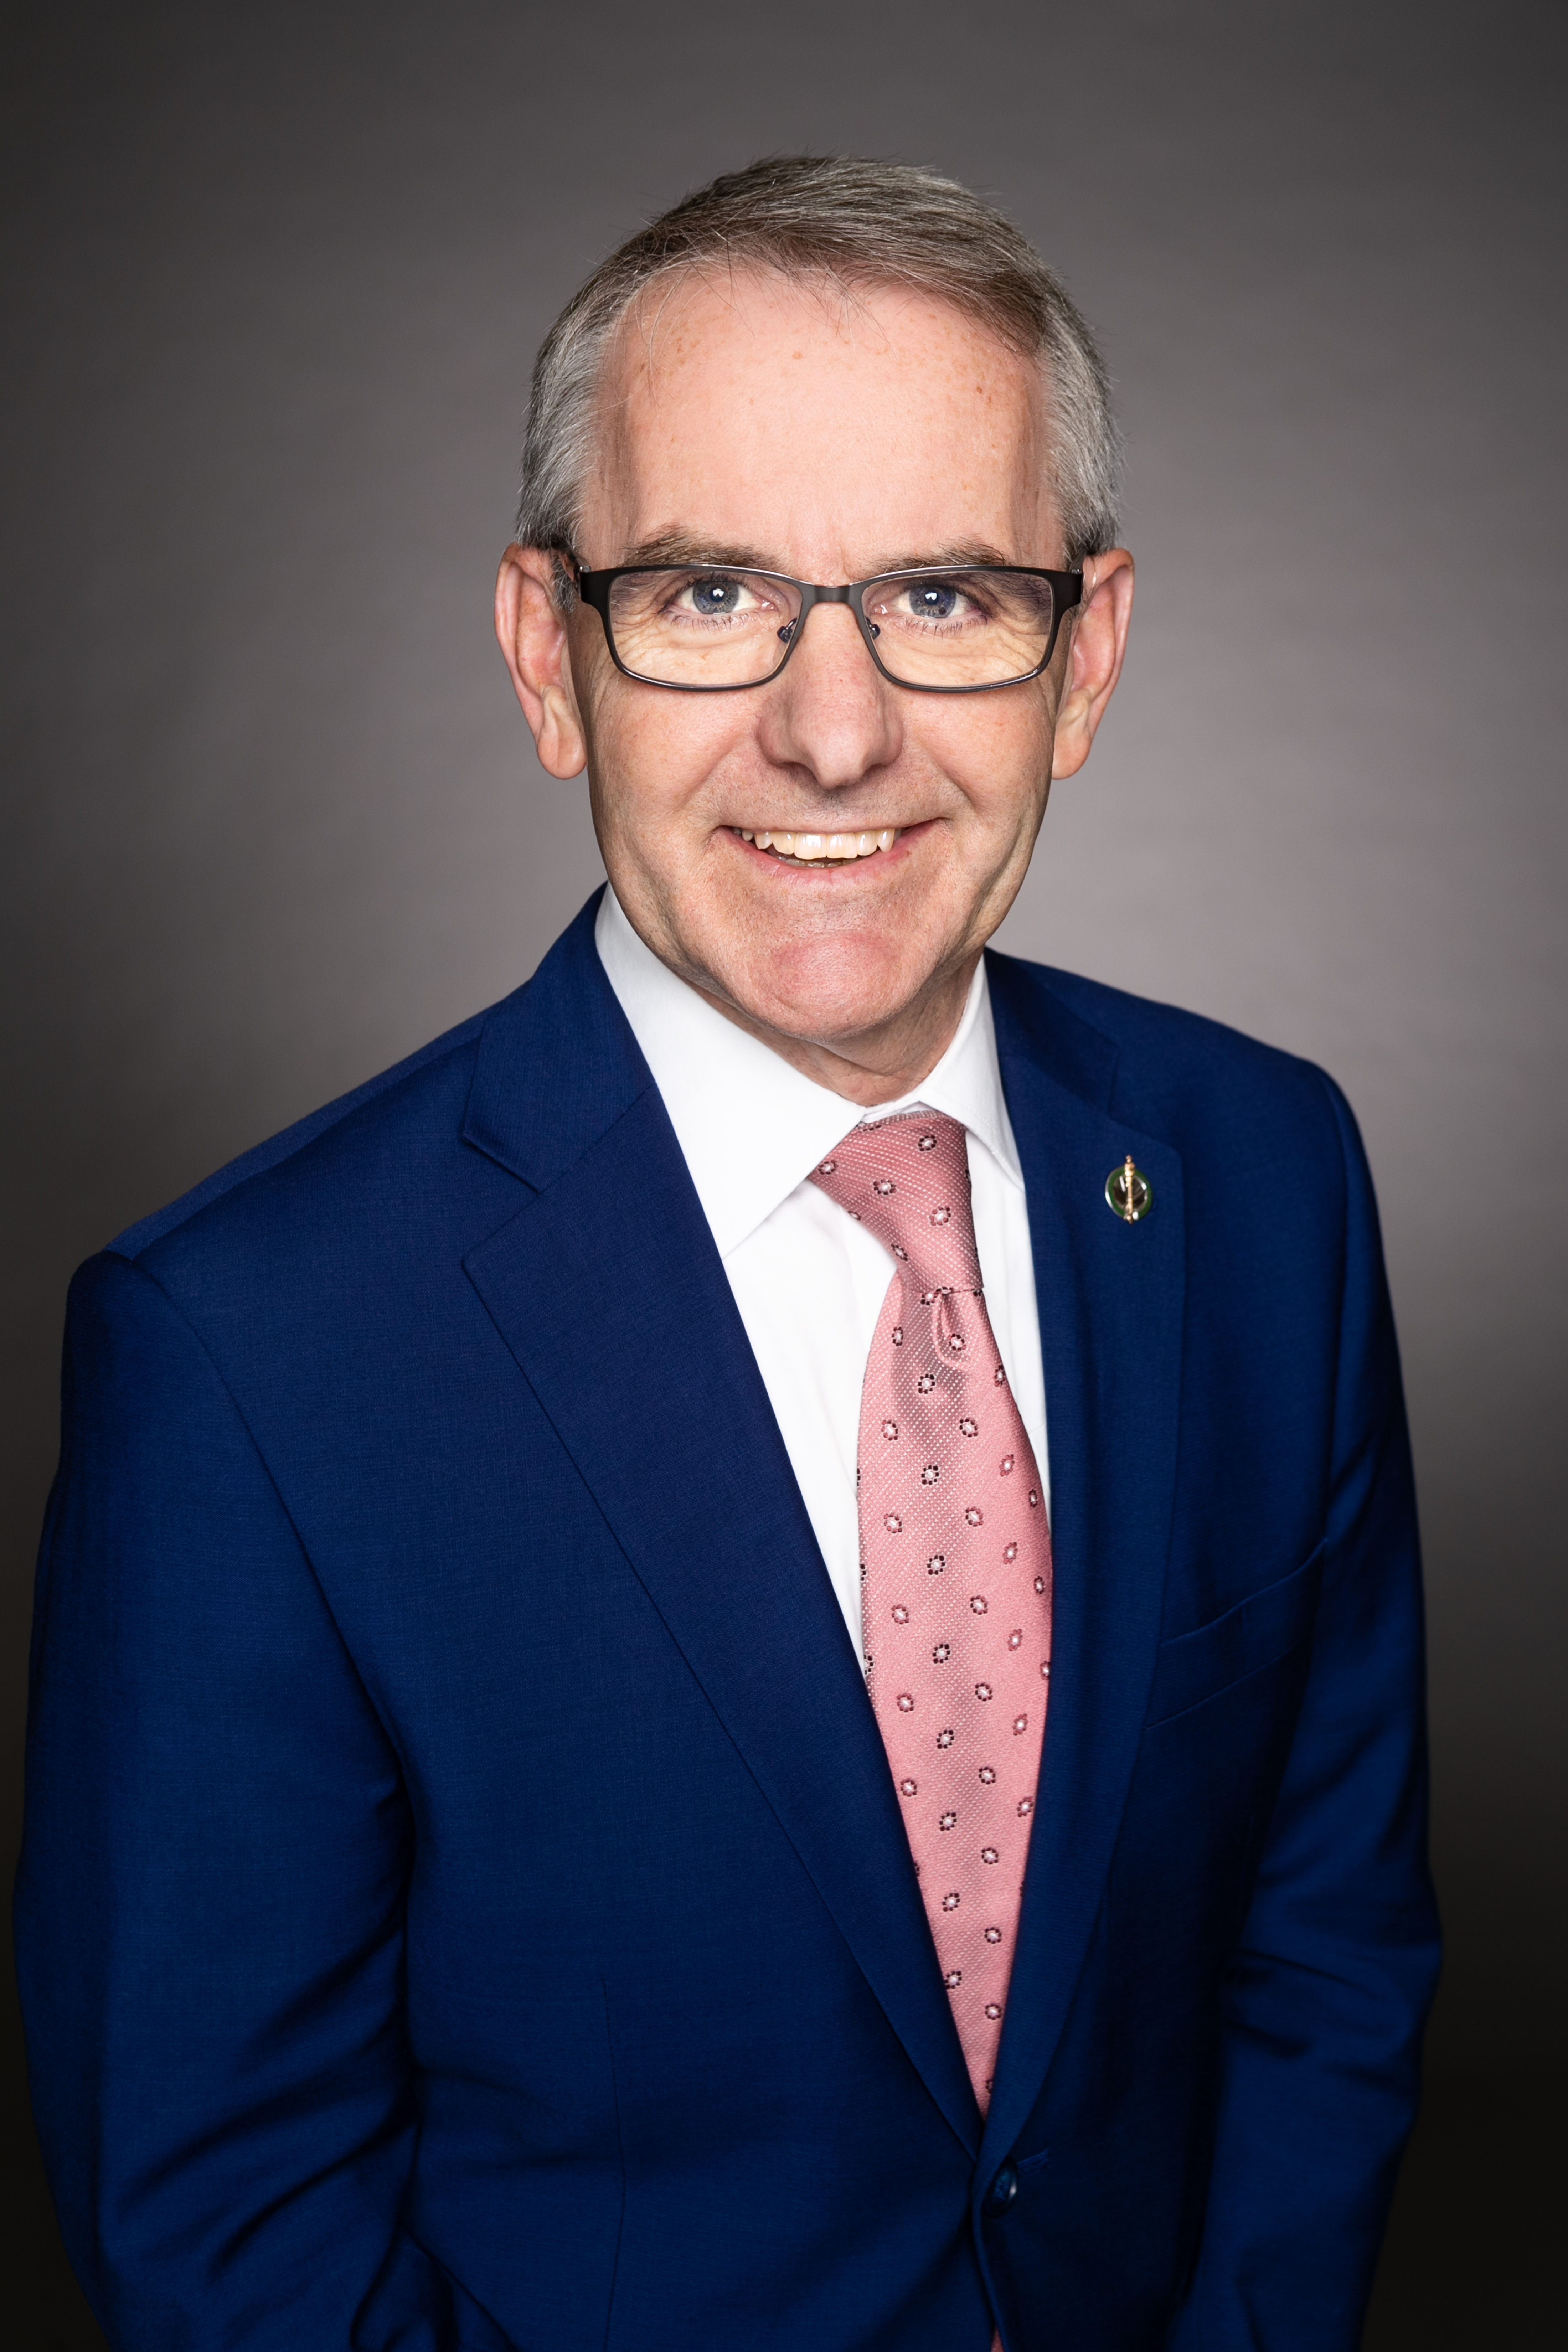 Official Portrait of Simcoe North MP Bruce Stanton